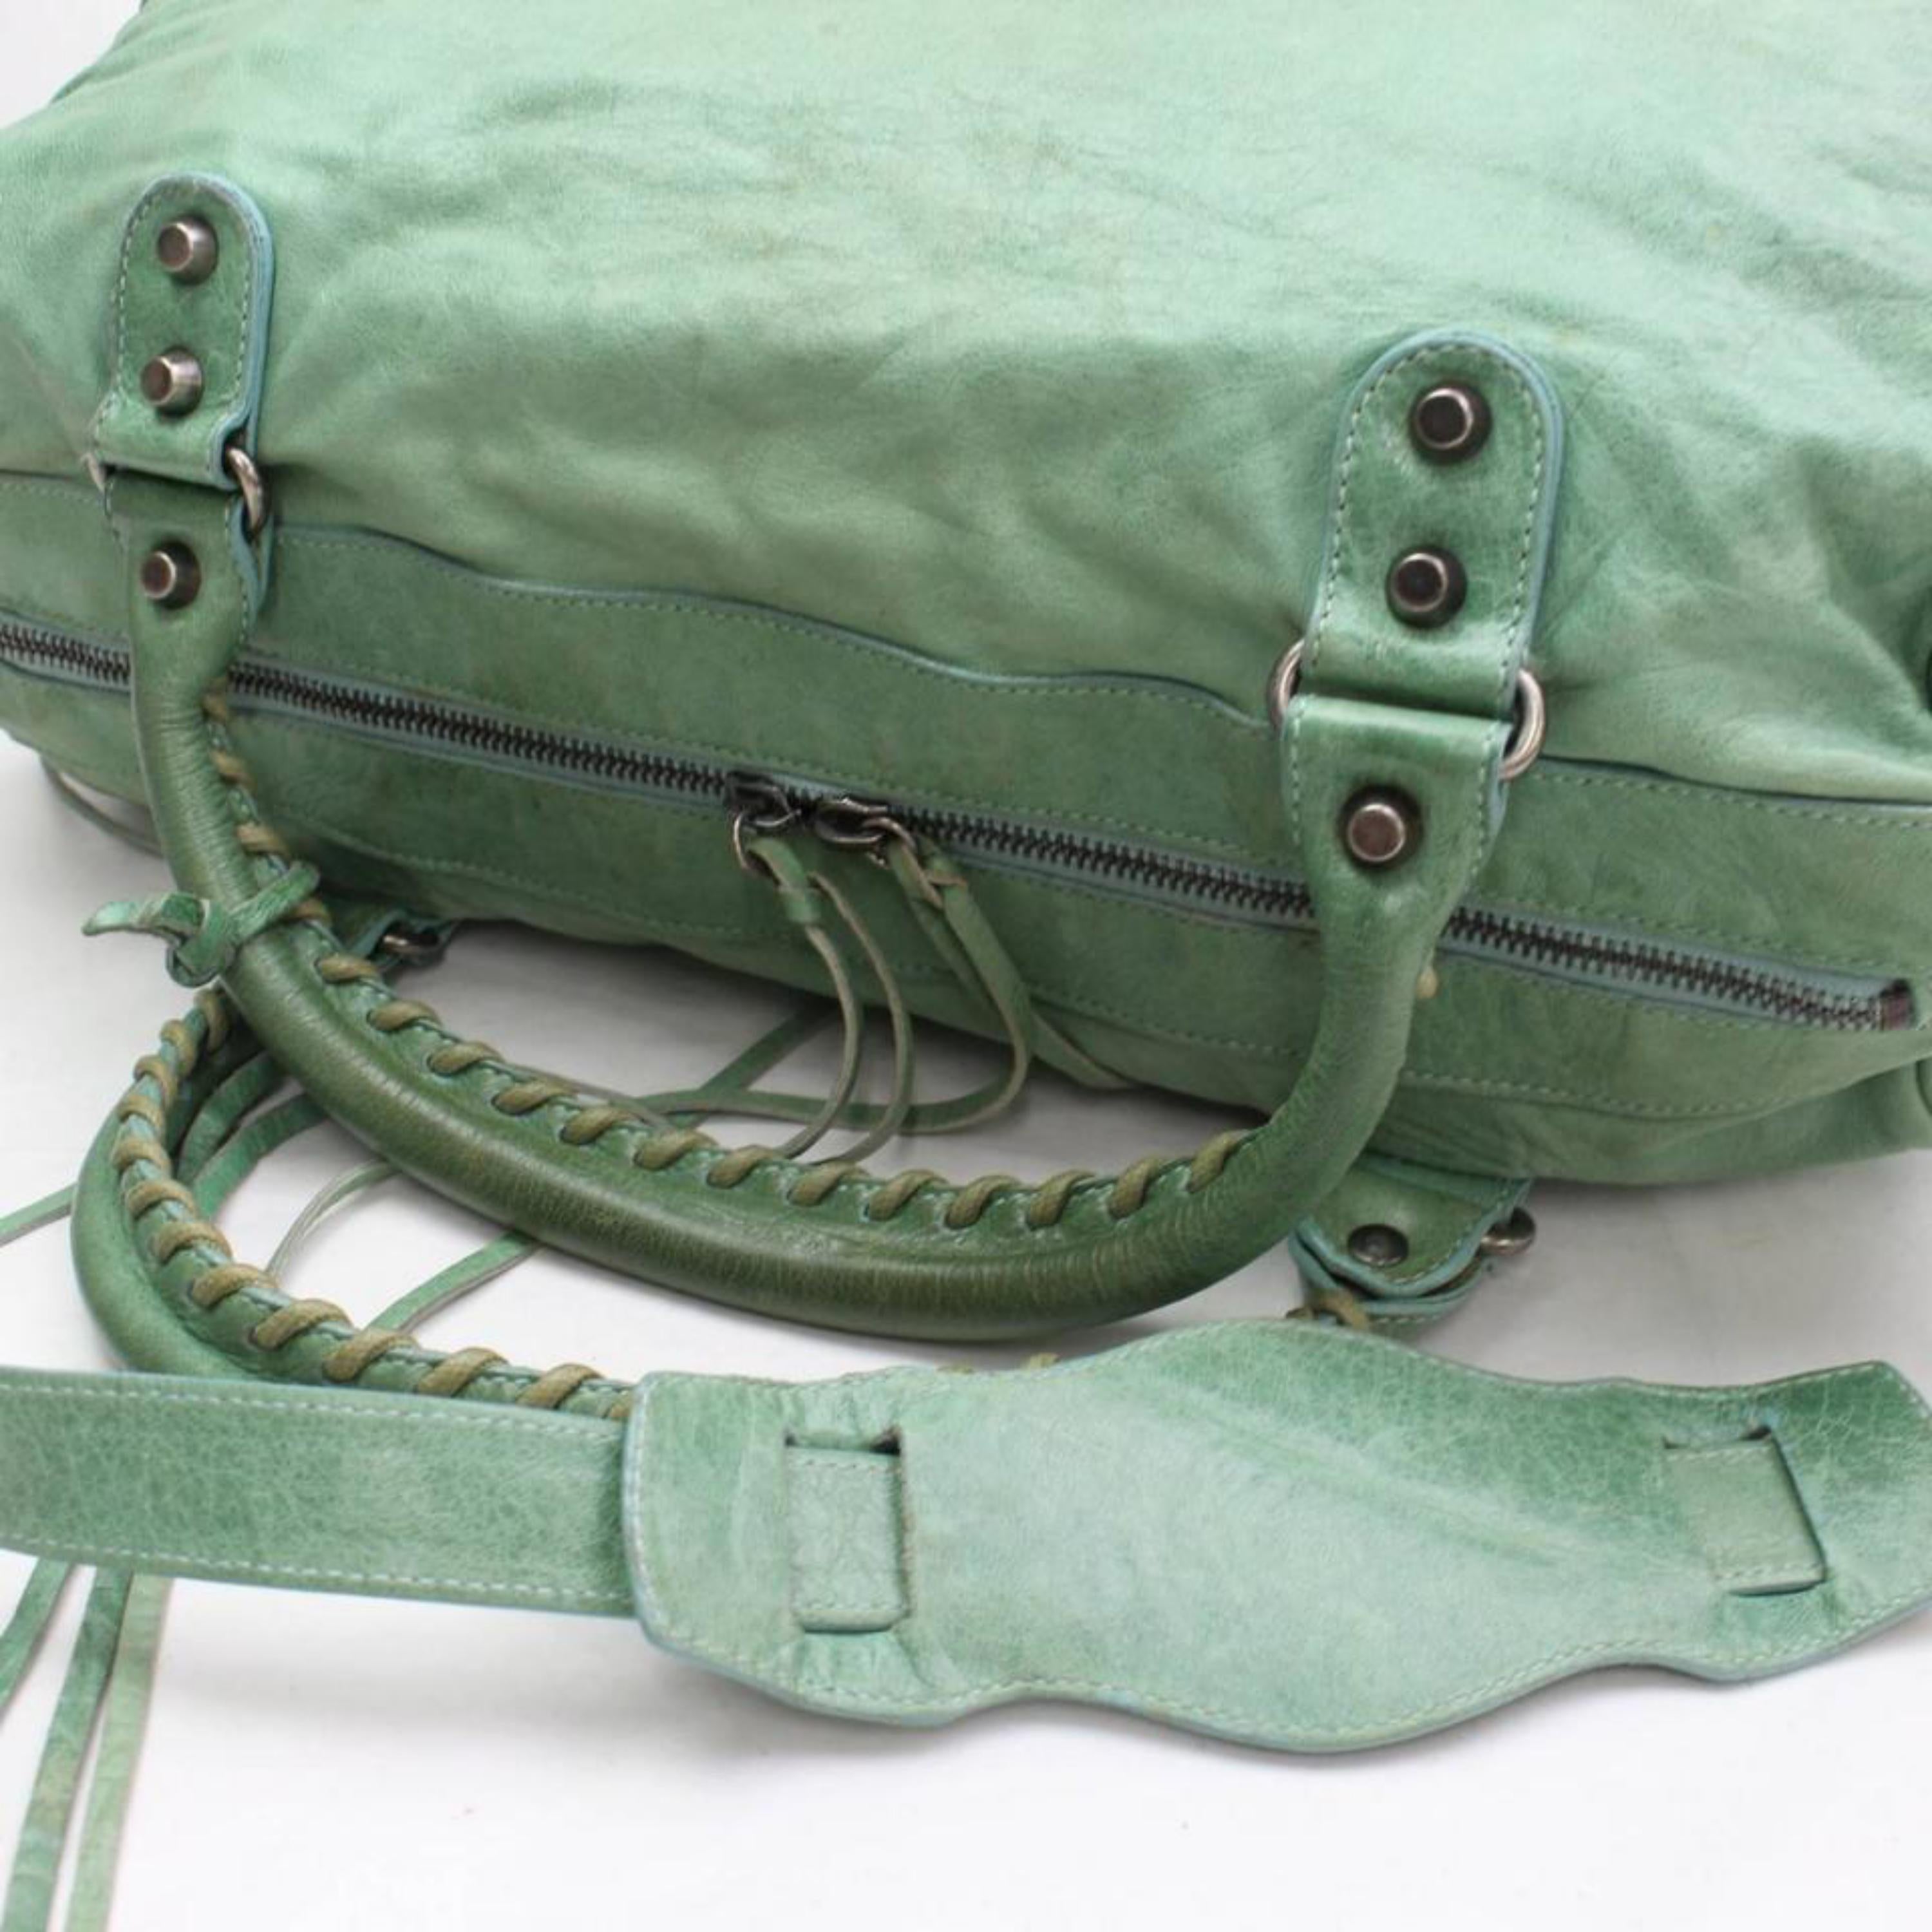 Balenciaga Twiggy 2way 868287 Green Leather Shoulder Bag In Good Condition For Sale In Forest Hills, NY